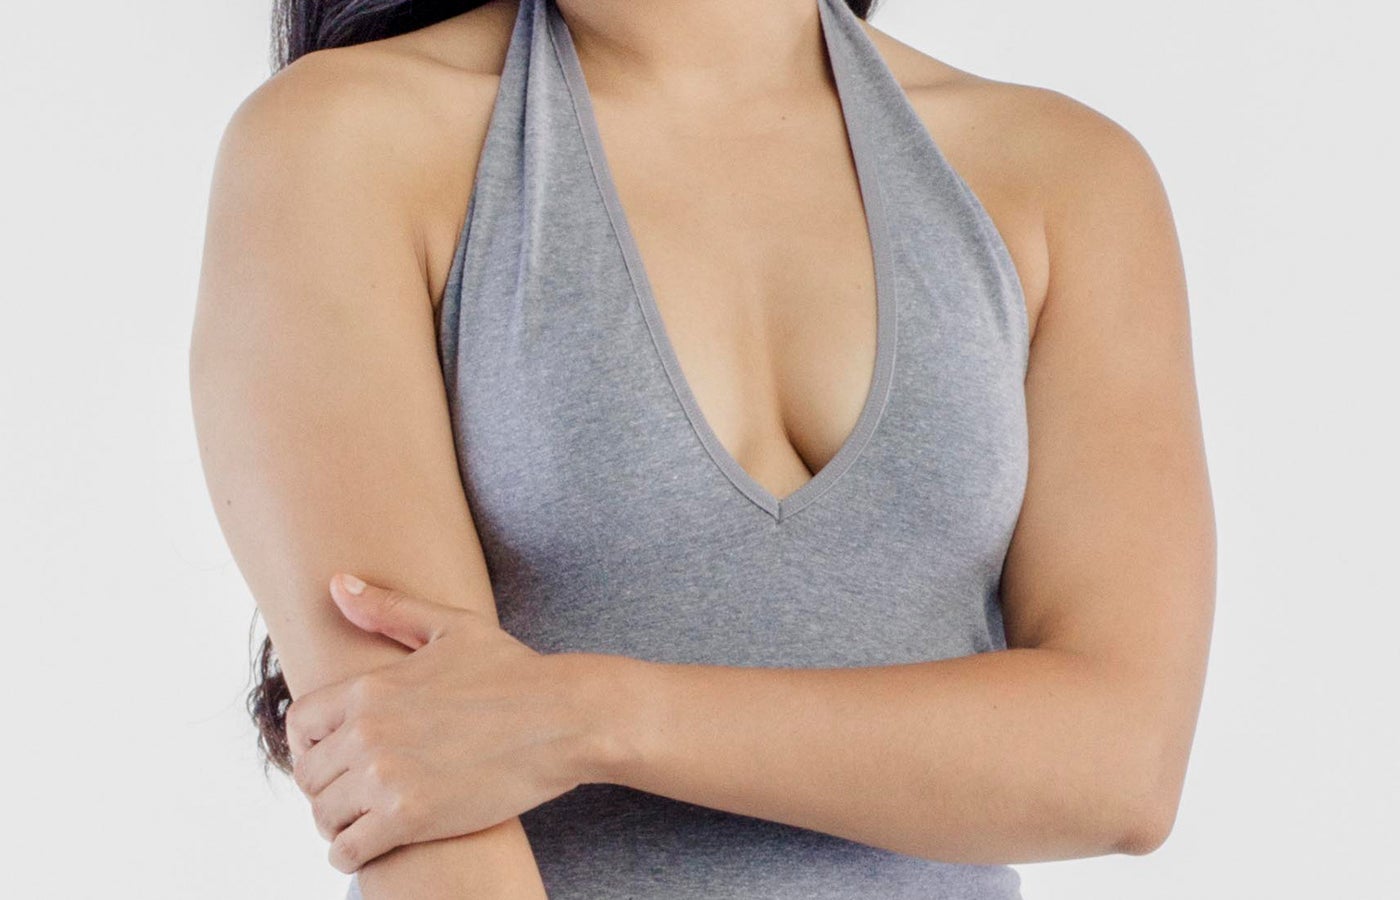 Breast Reduction Surgery Benefits, Risks, Recovery